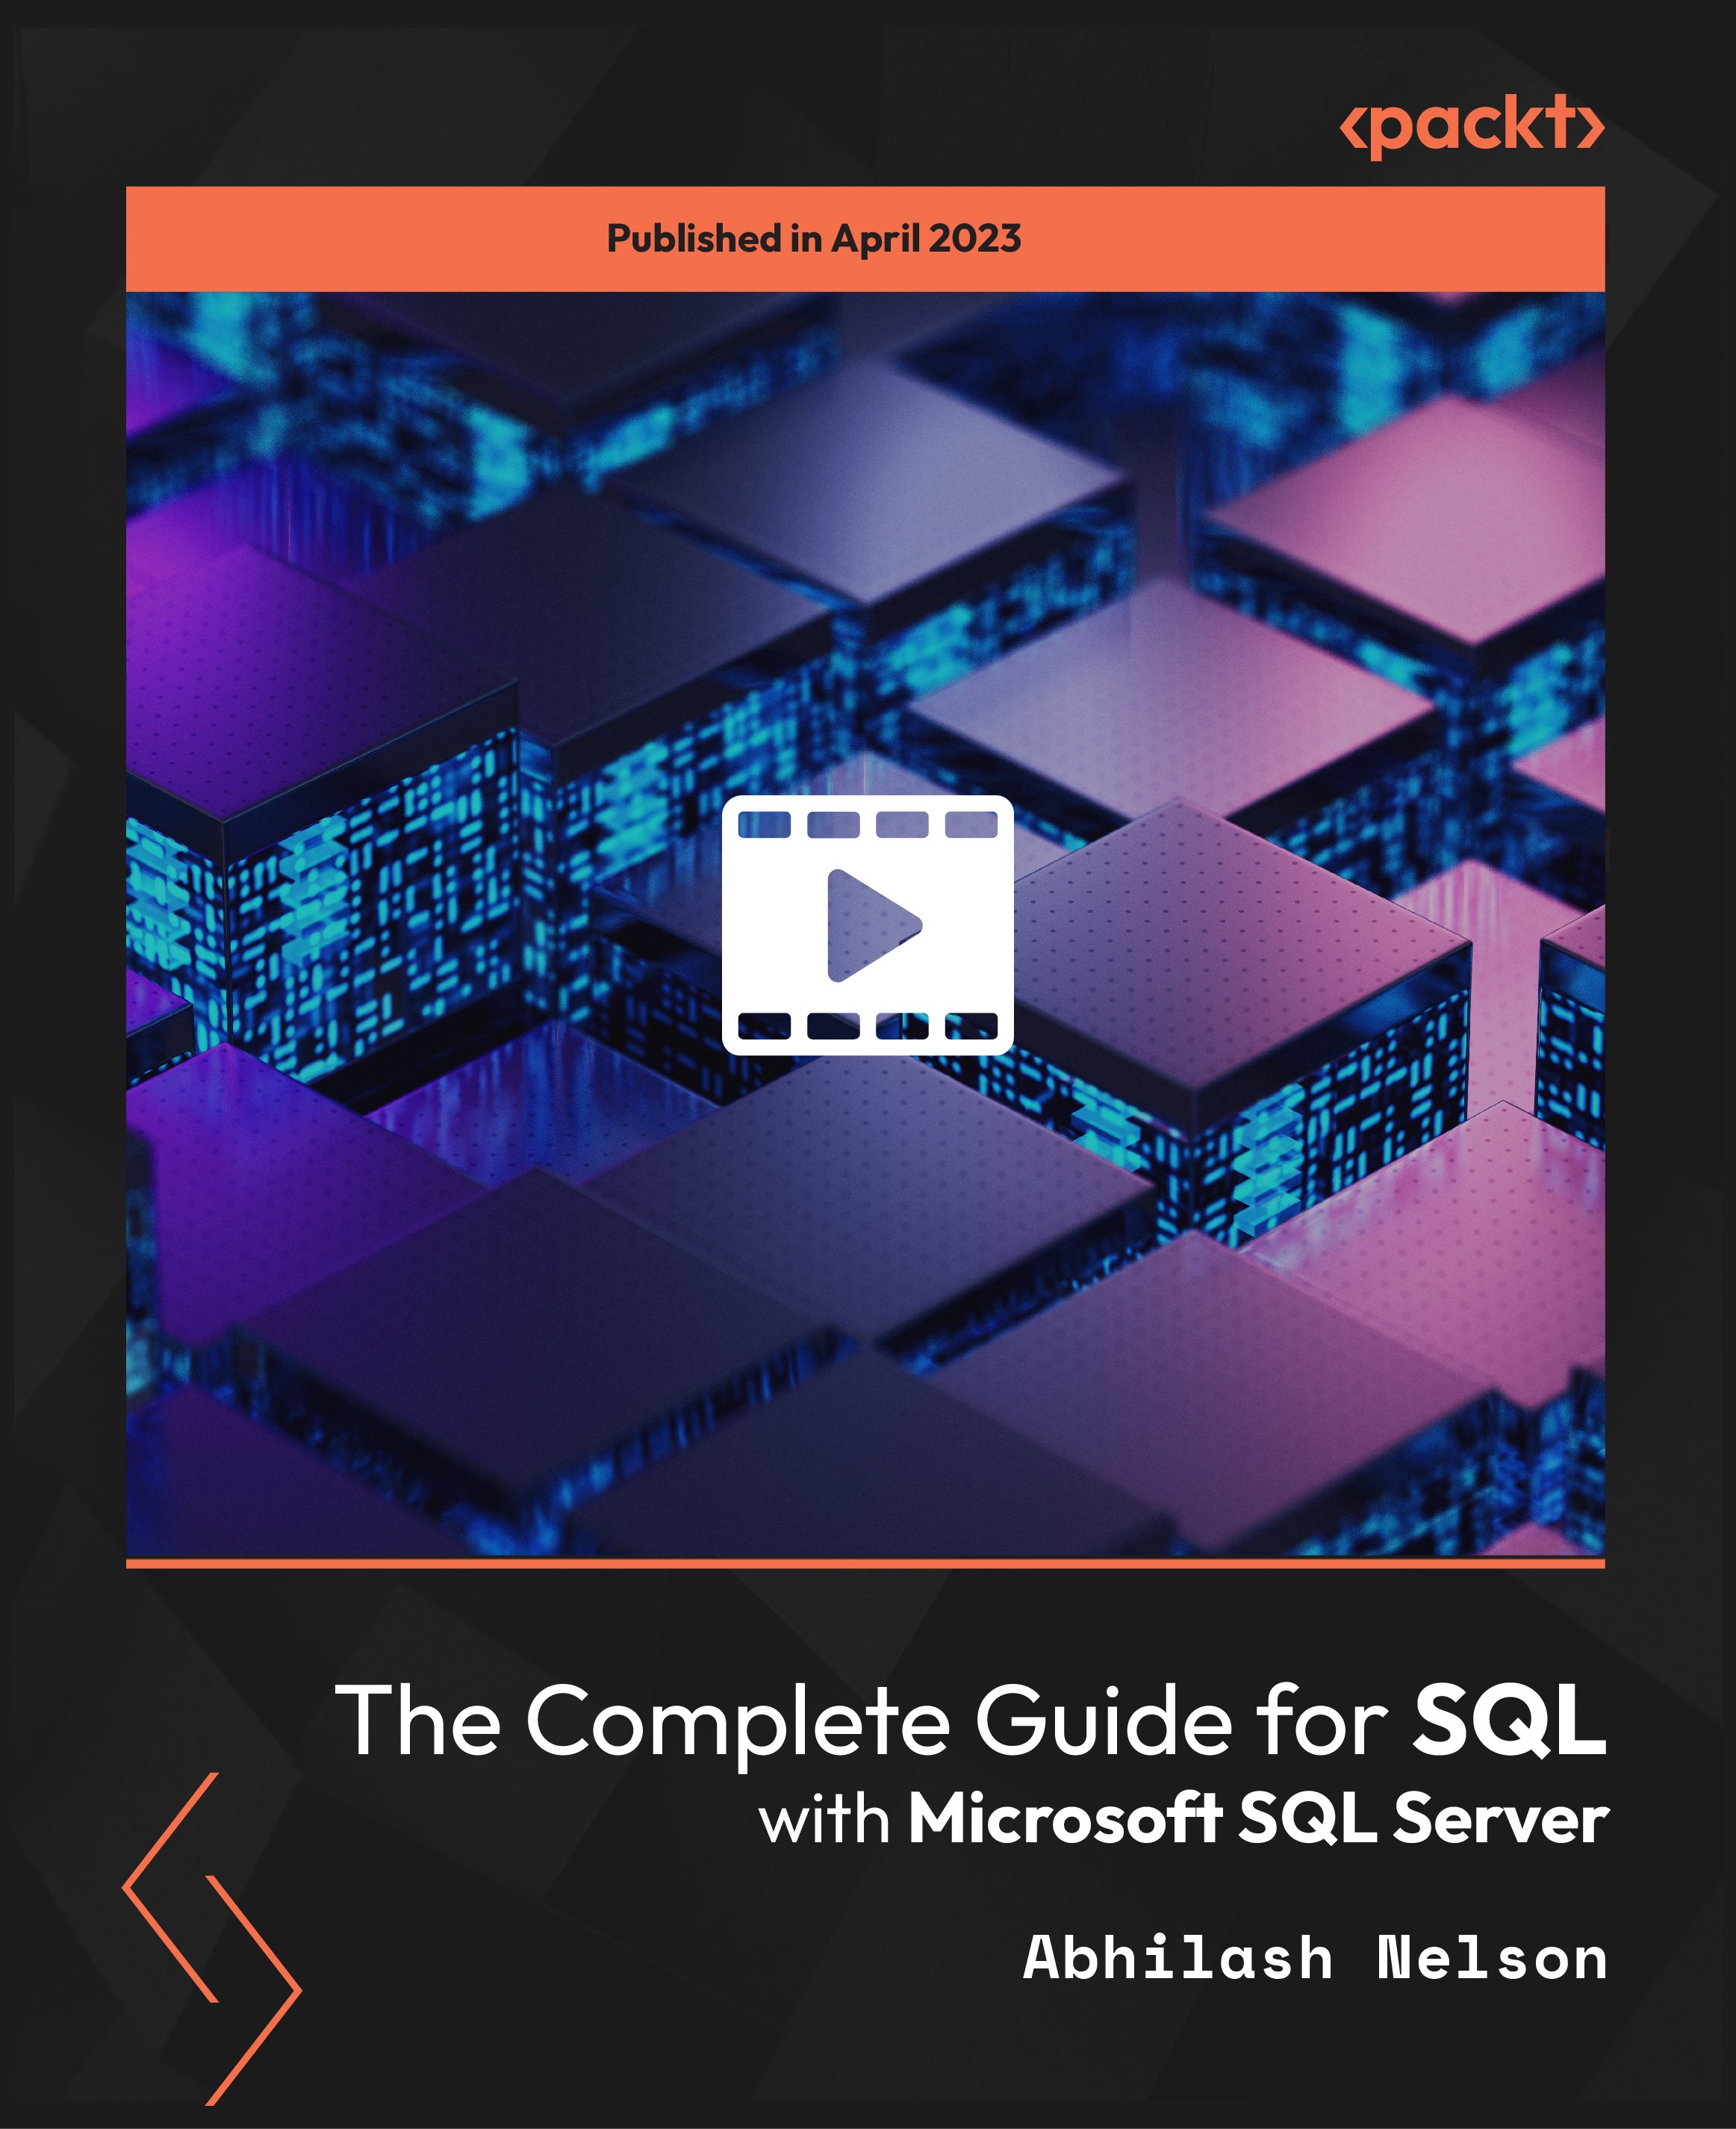 The Complete Guide for SQL with Microsoft SQL Server